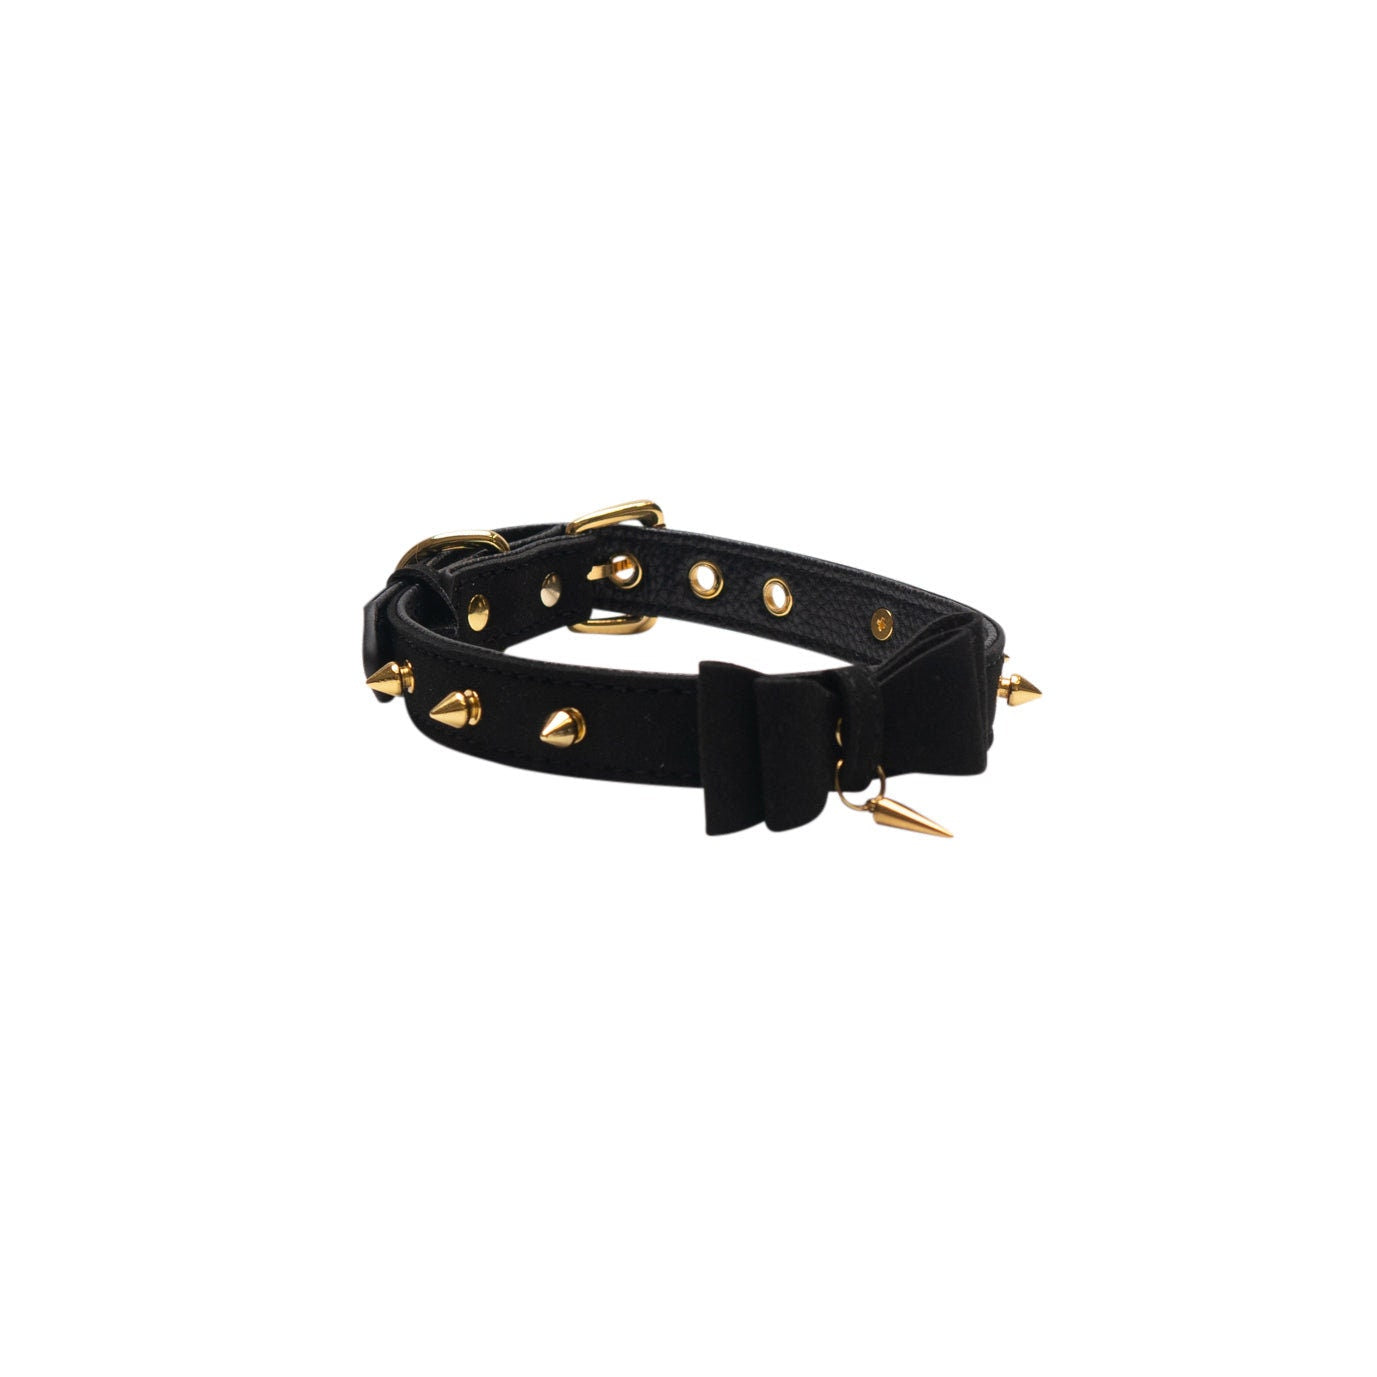 Black and Gold Sexy Bdsm Collar - Gold Spikes Choker